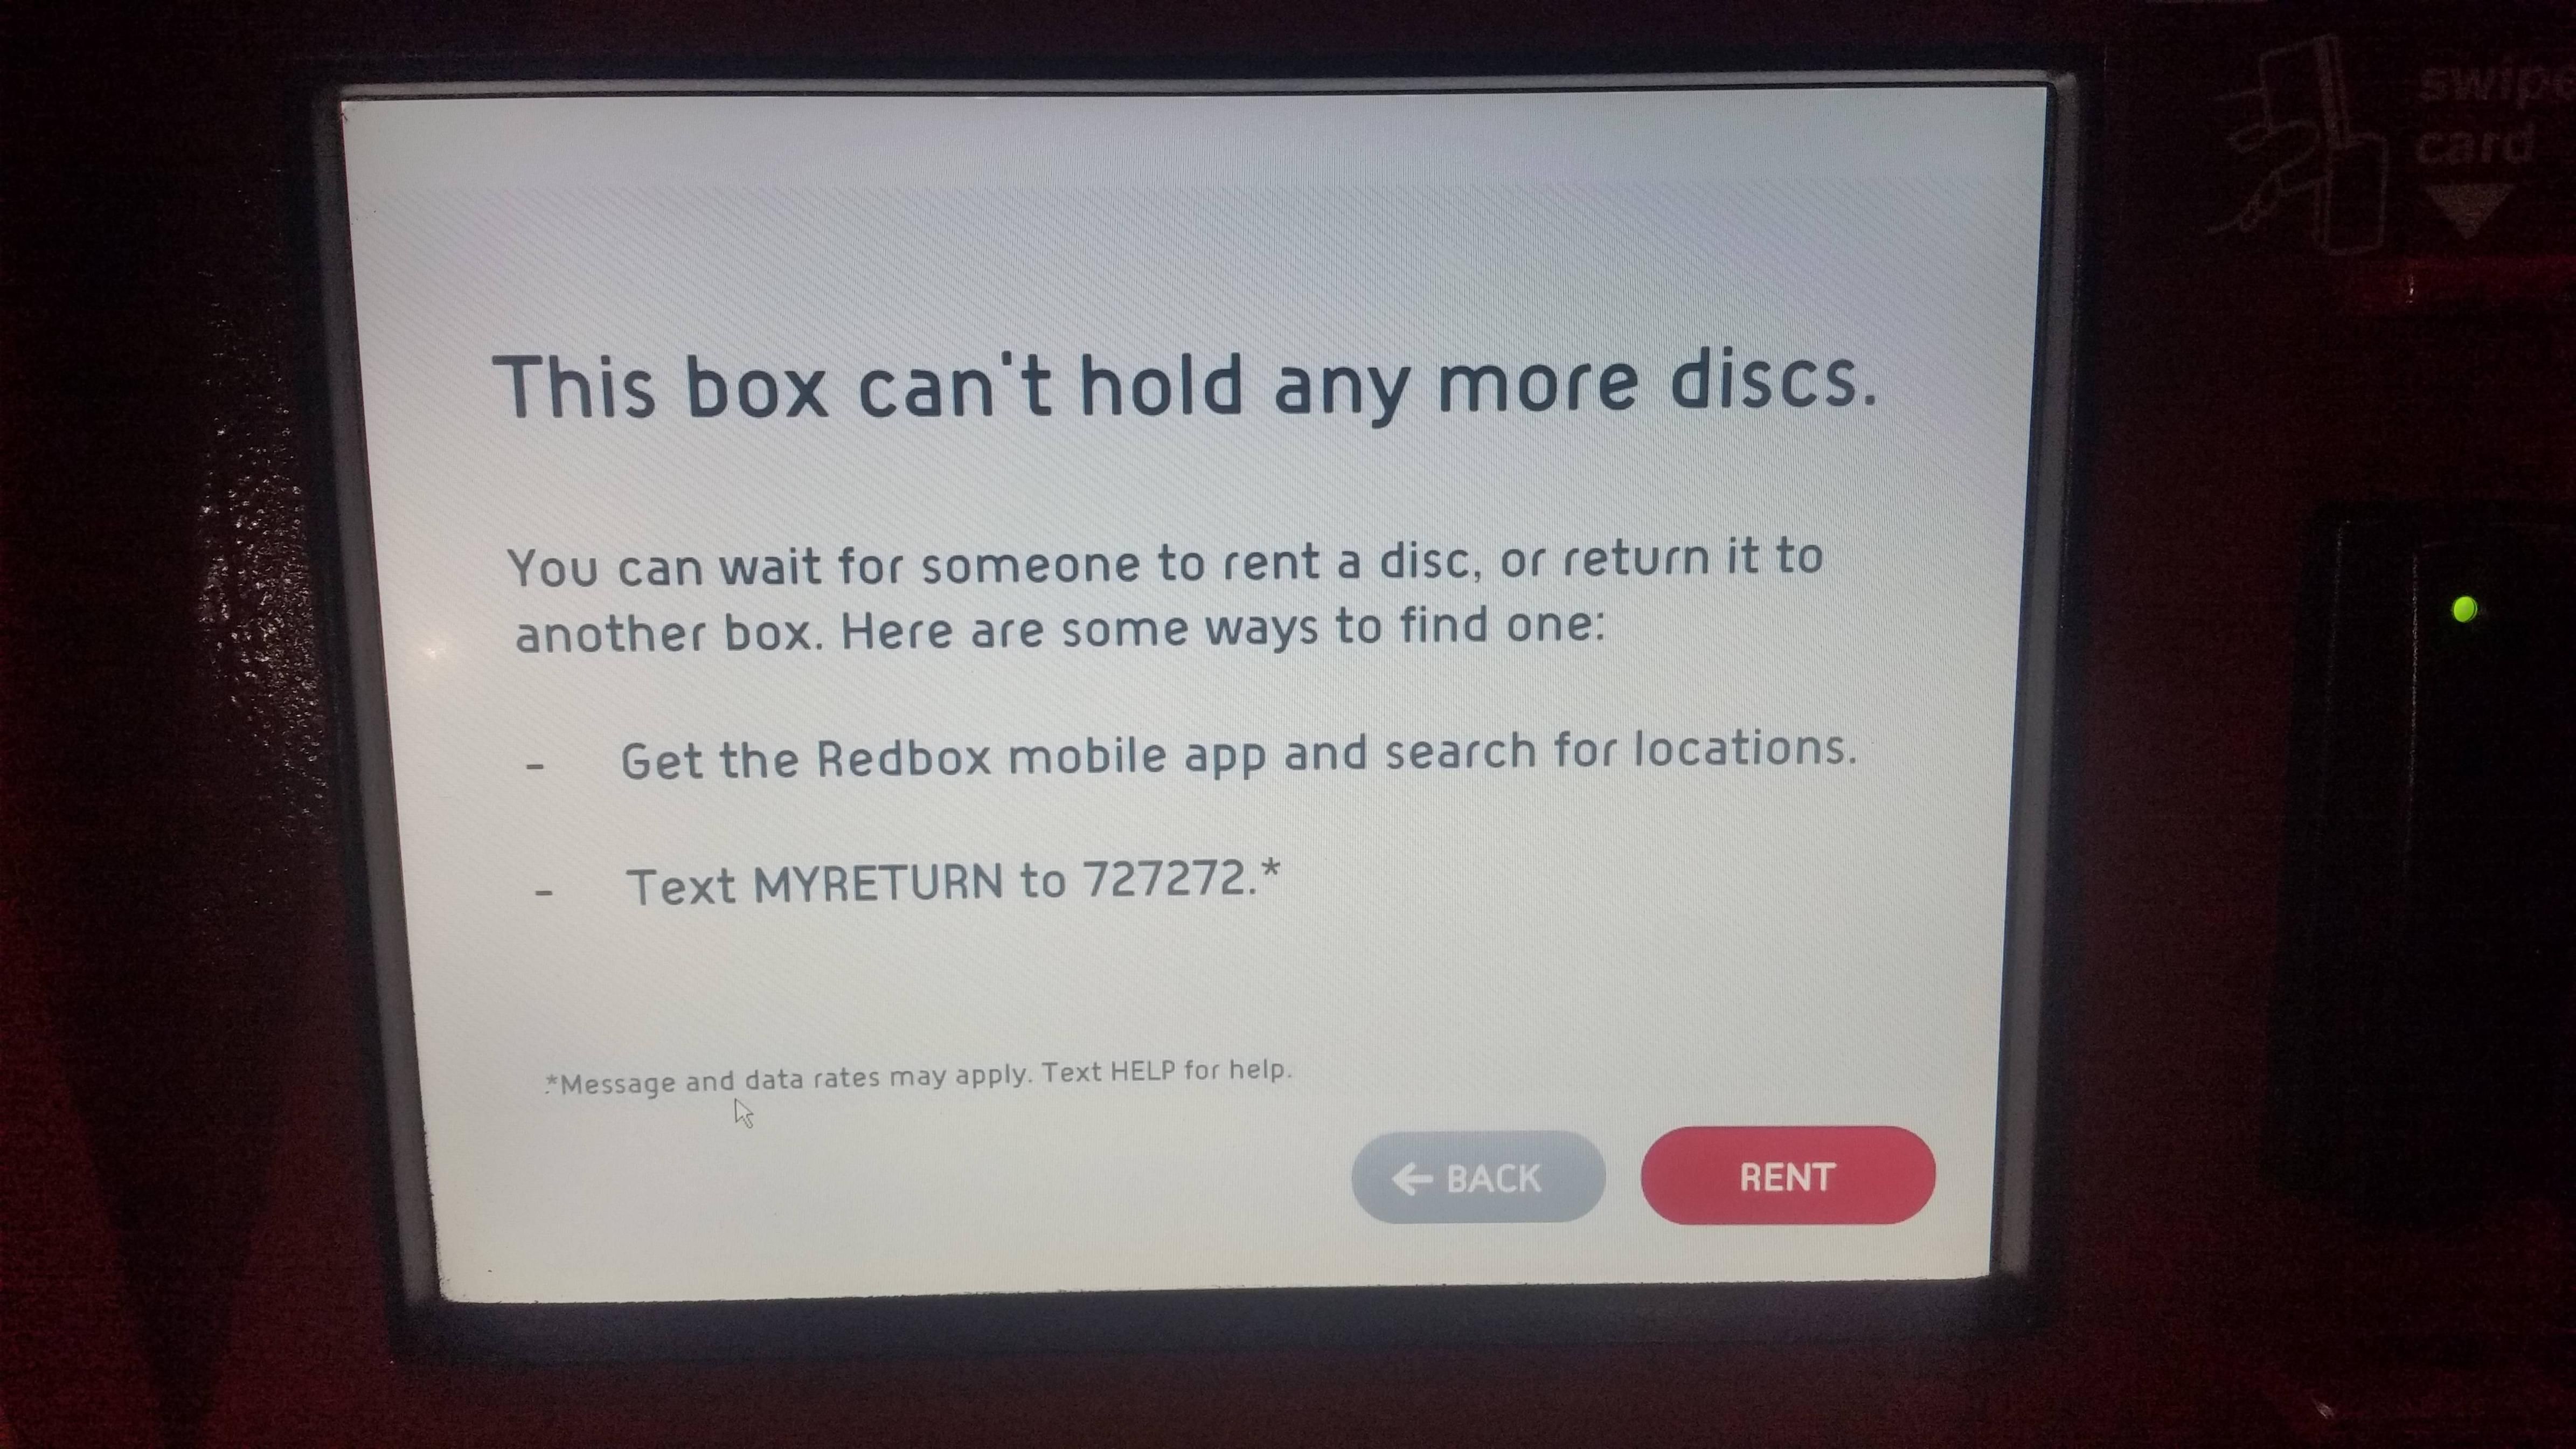 The only redbox near me is full...I guess I'm getting charged for another day.